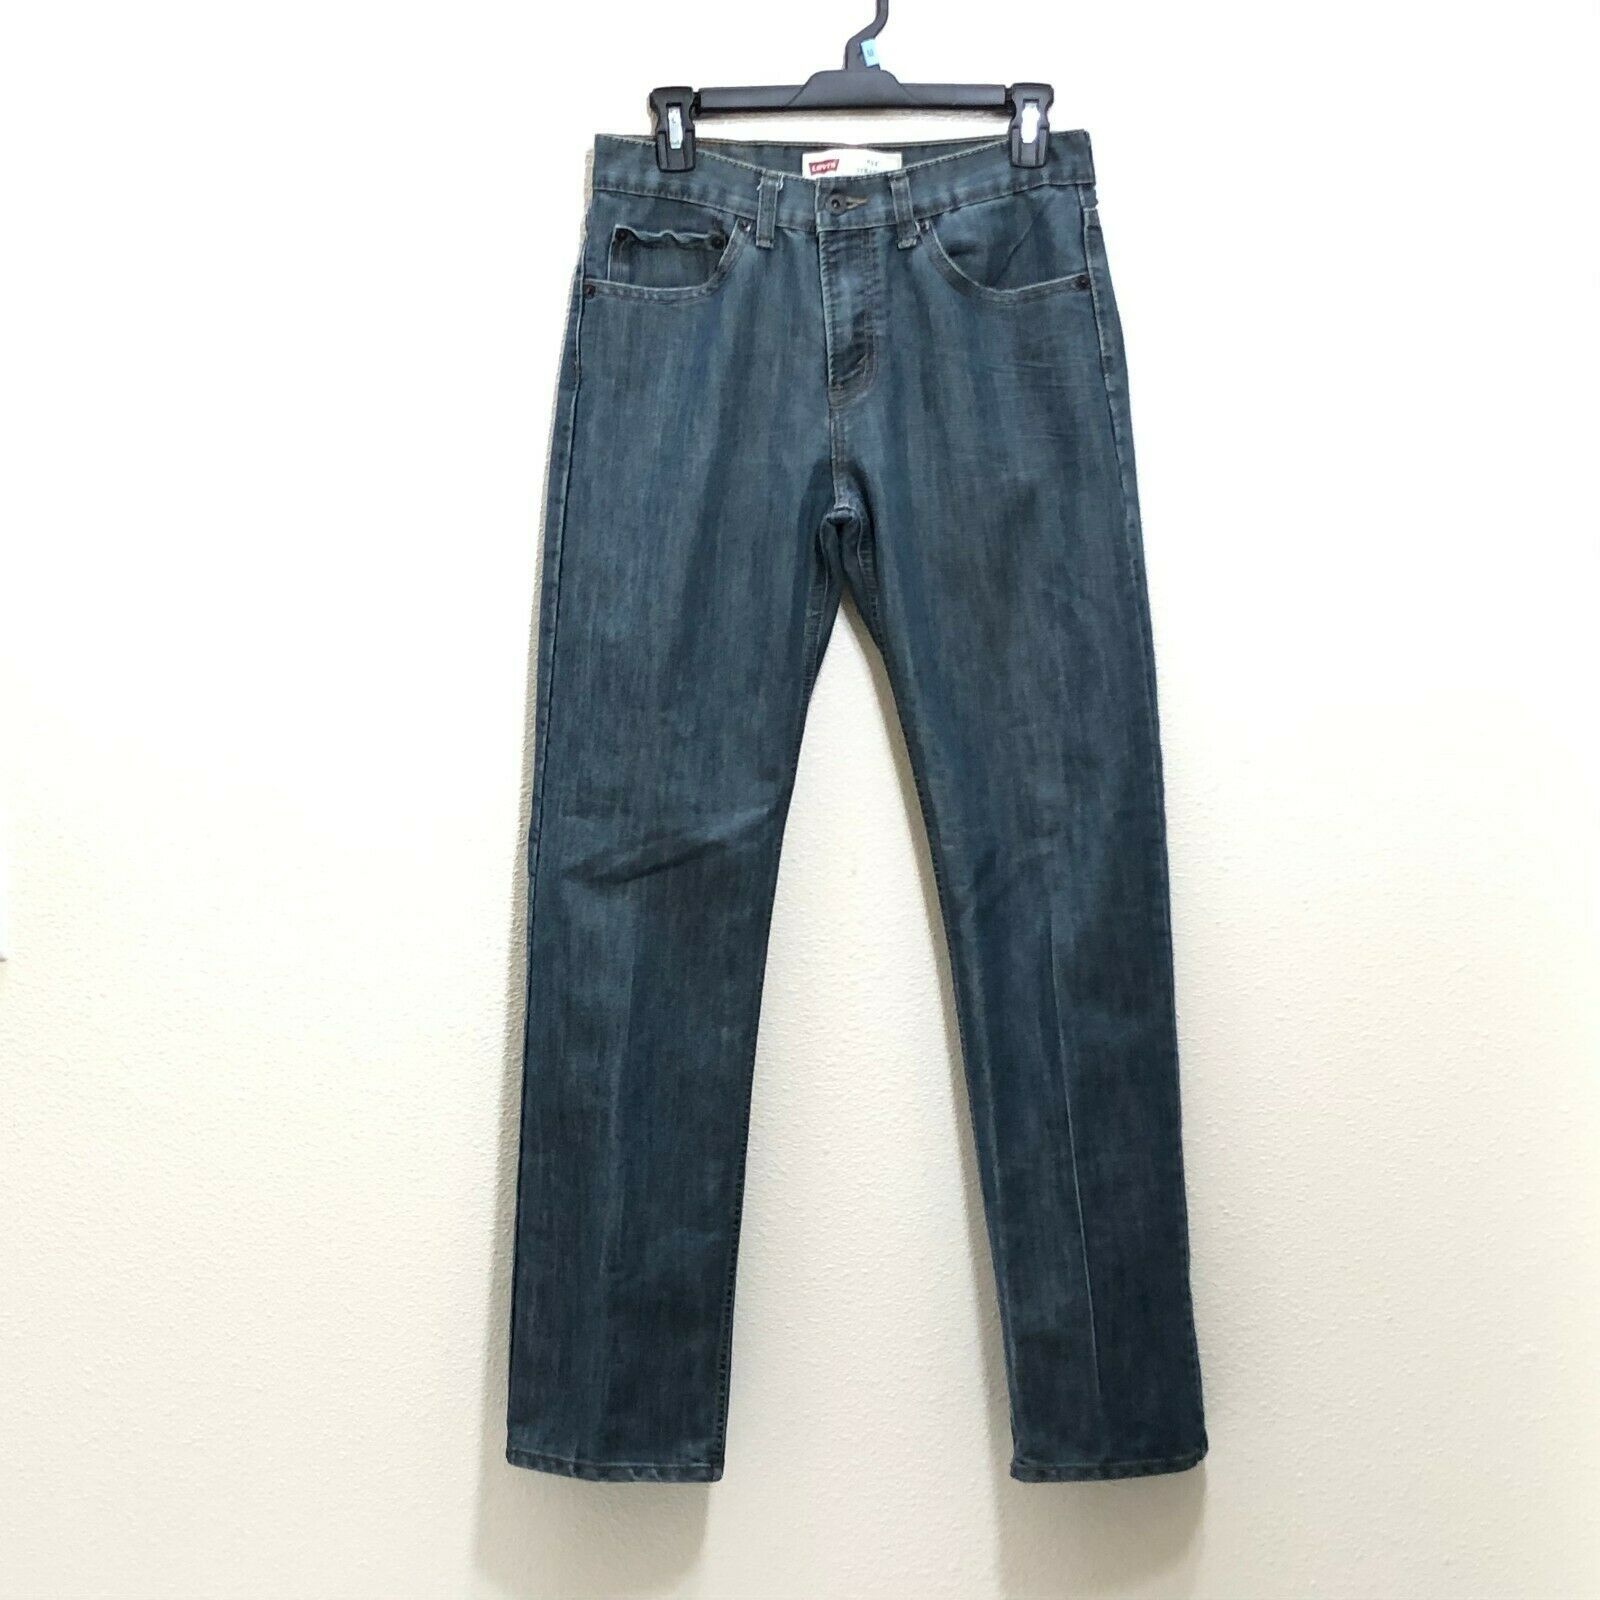 jeans similar to levis 514